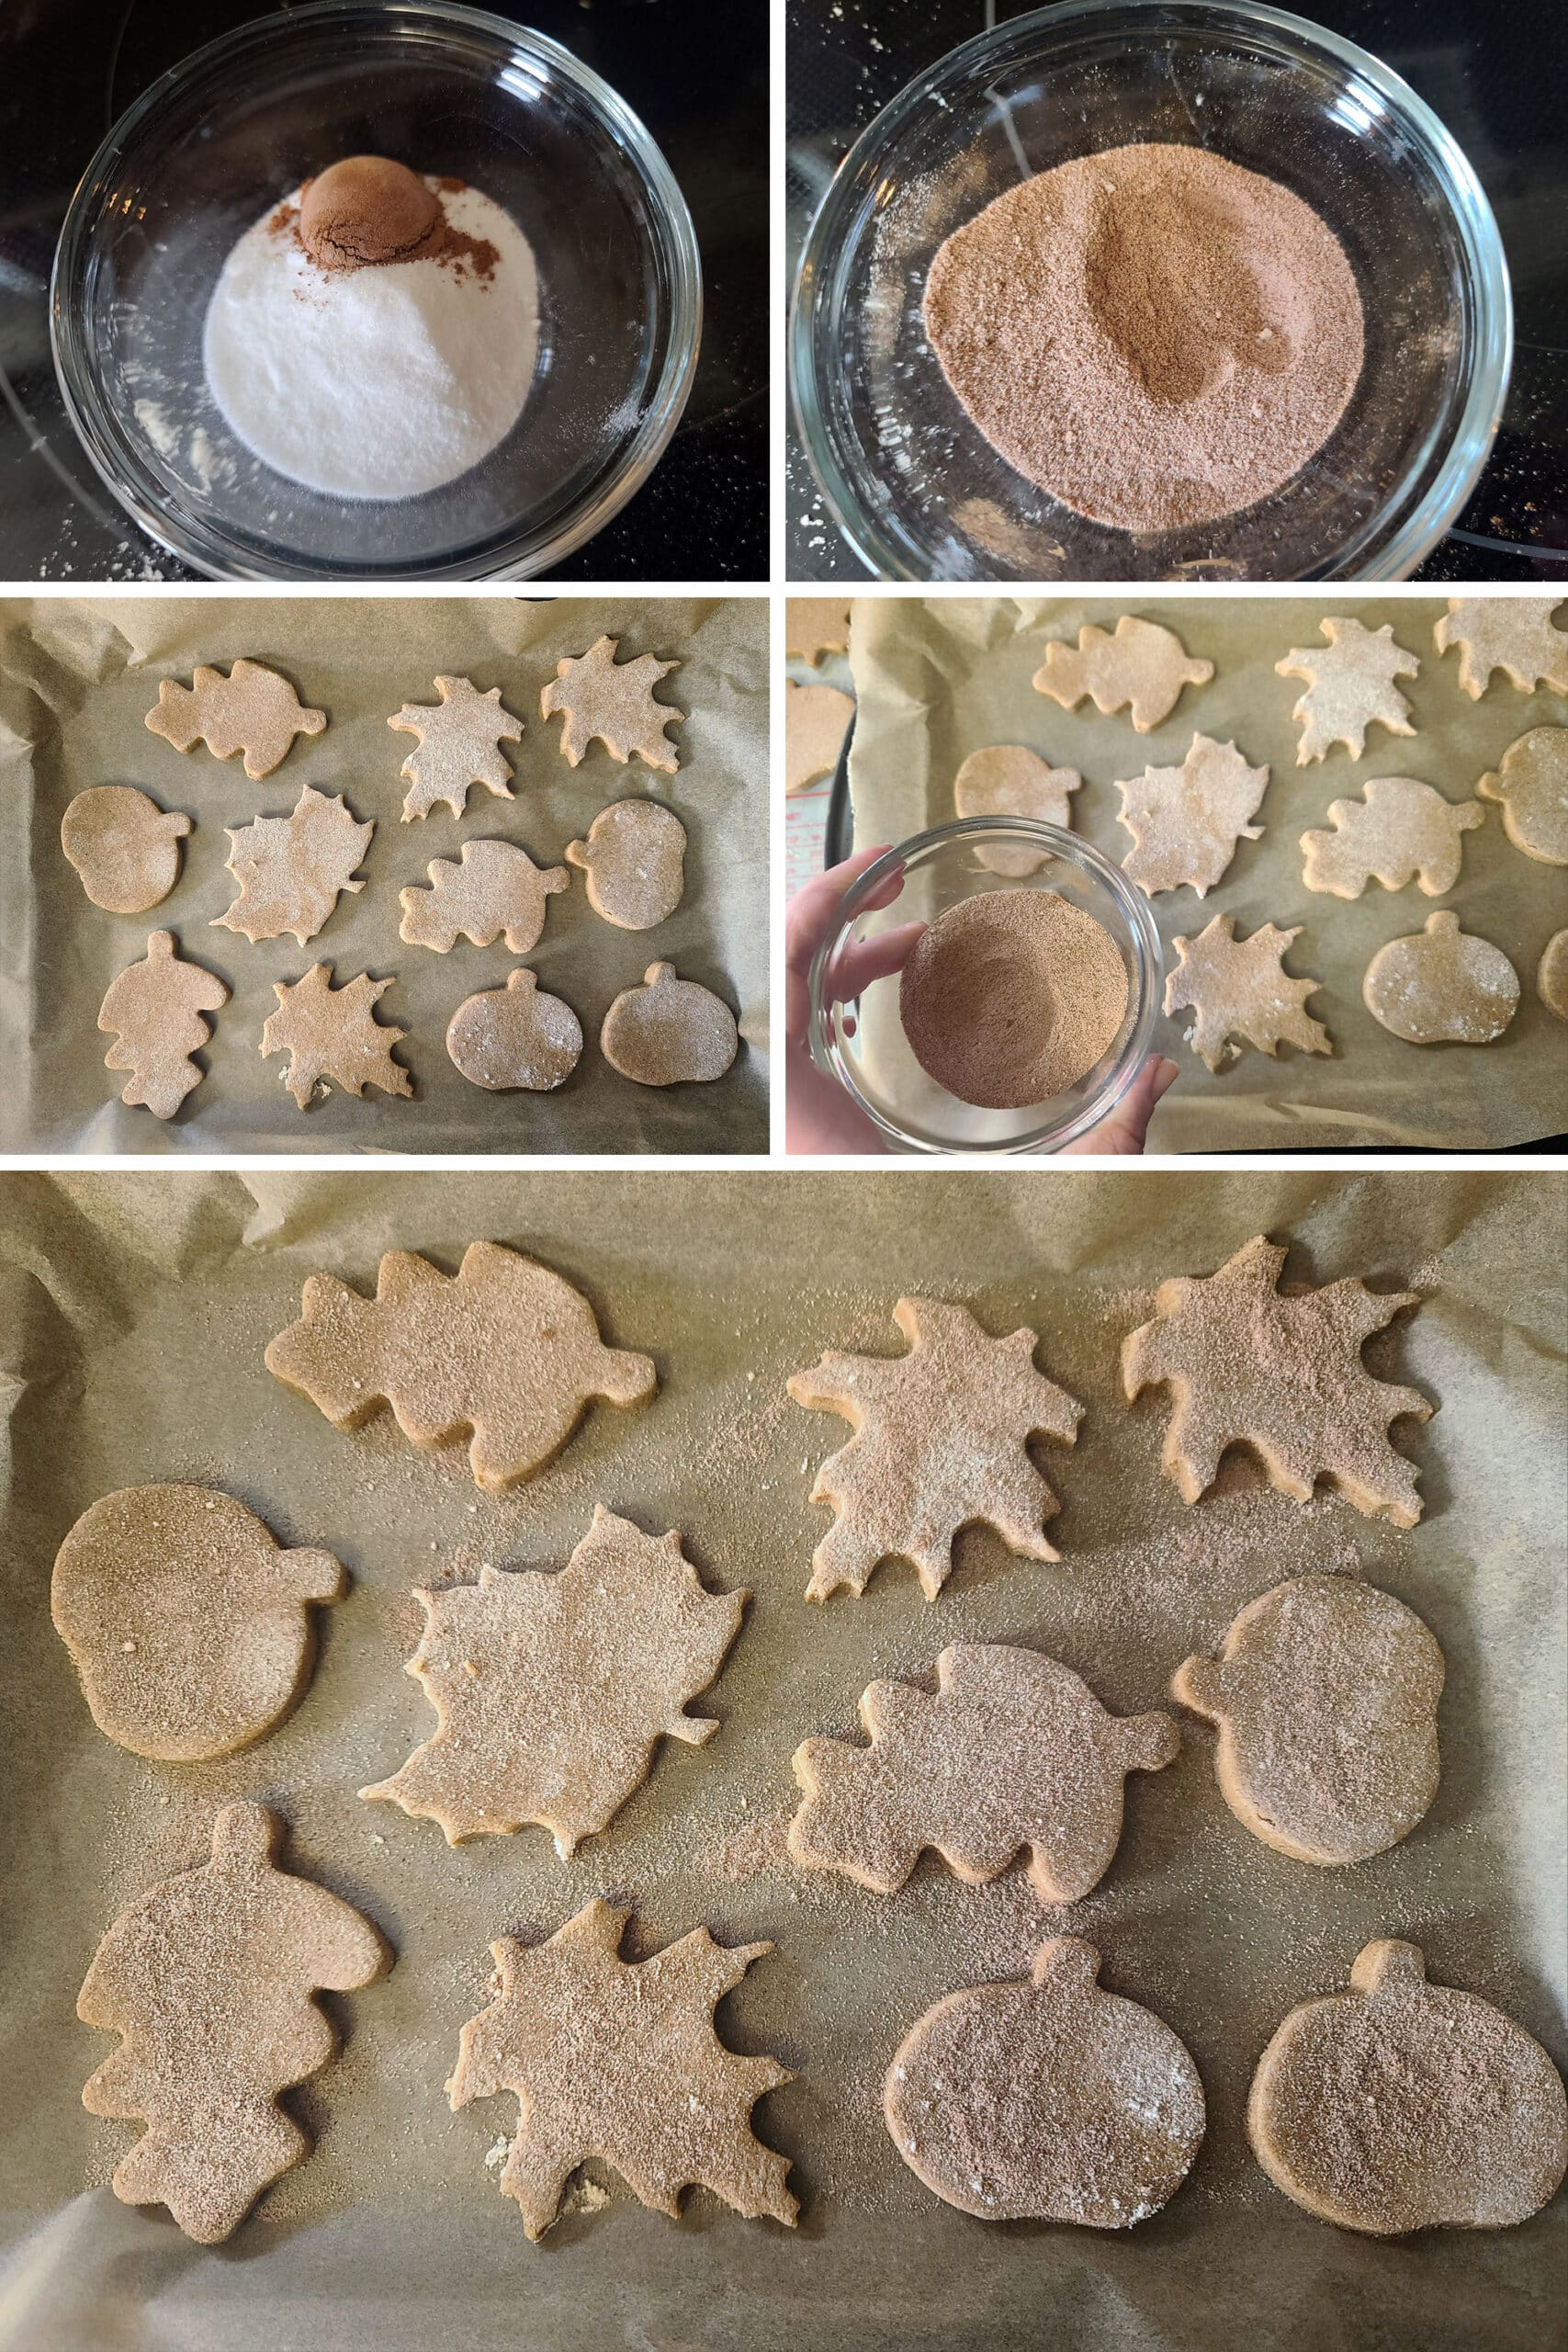 5 part image showing the sugar substitute being mixed with pumpkin pie spice and sprinkled over leaf shaped unbaked keto cookies.